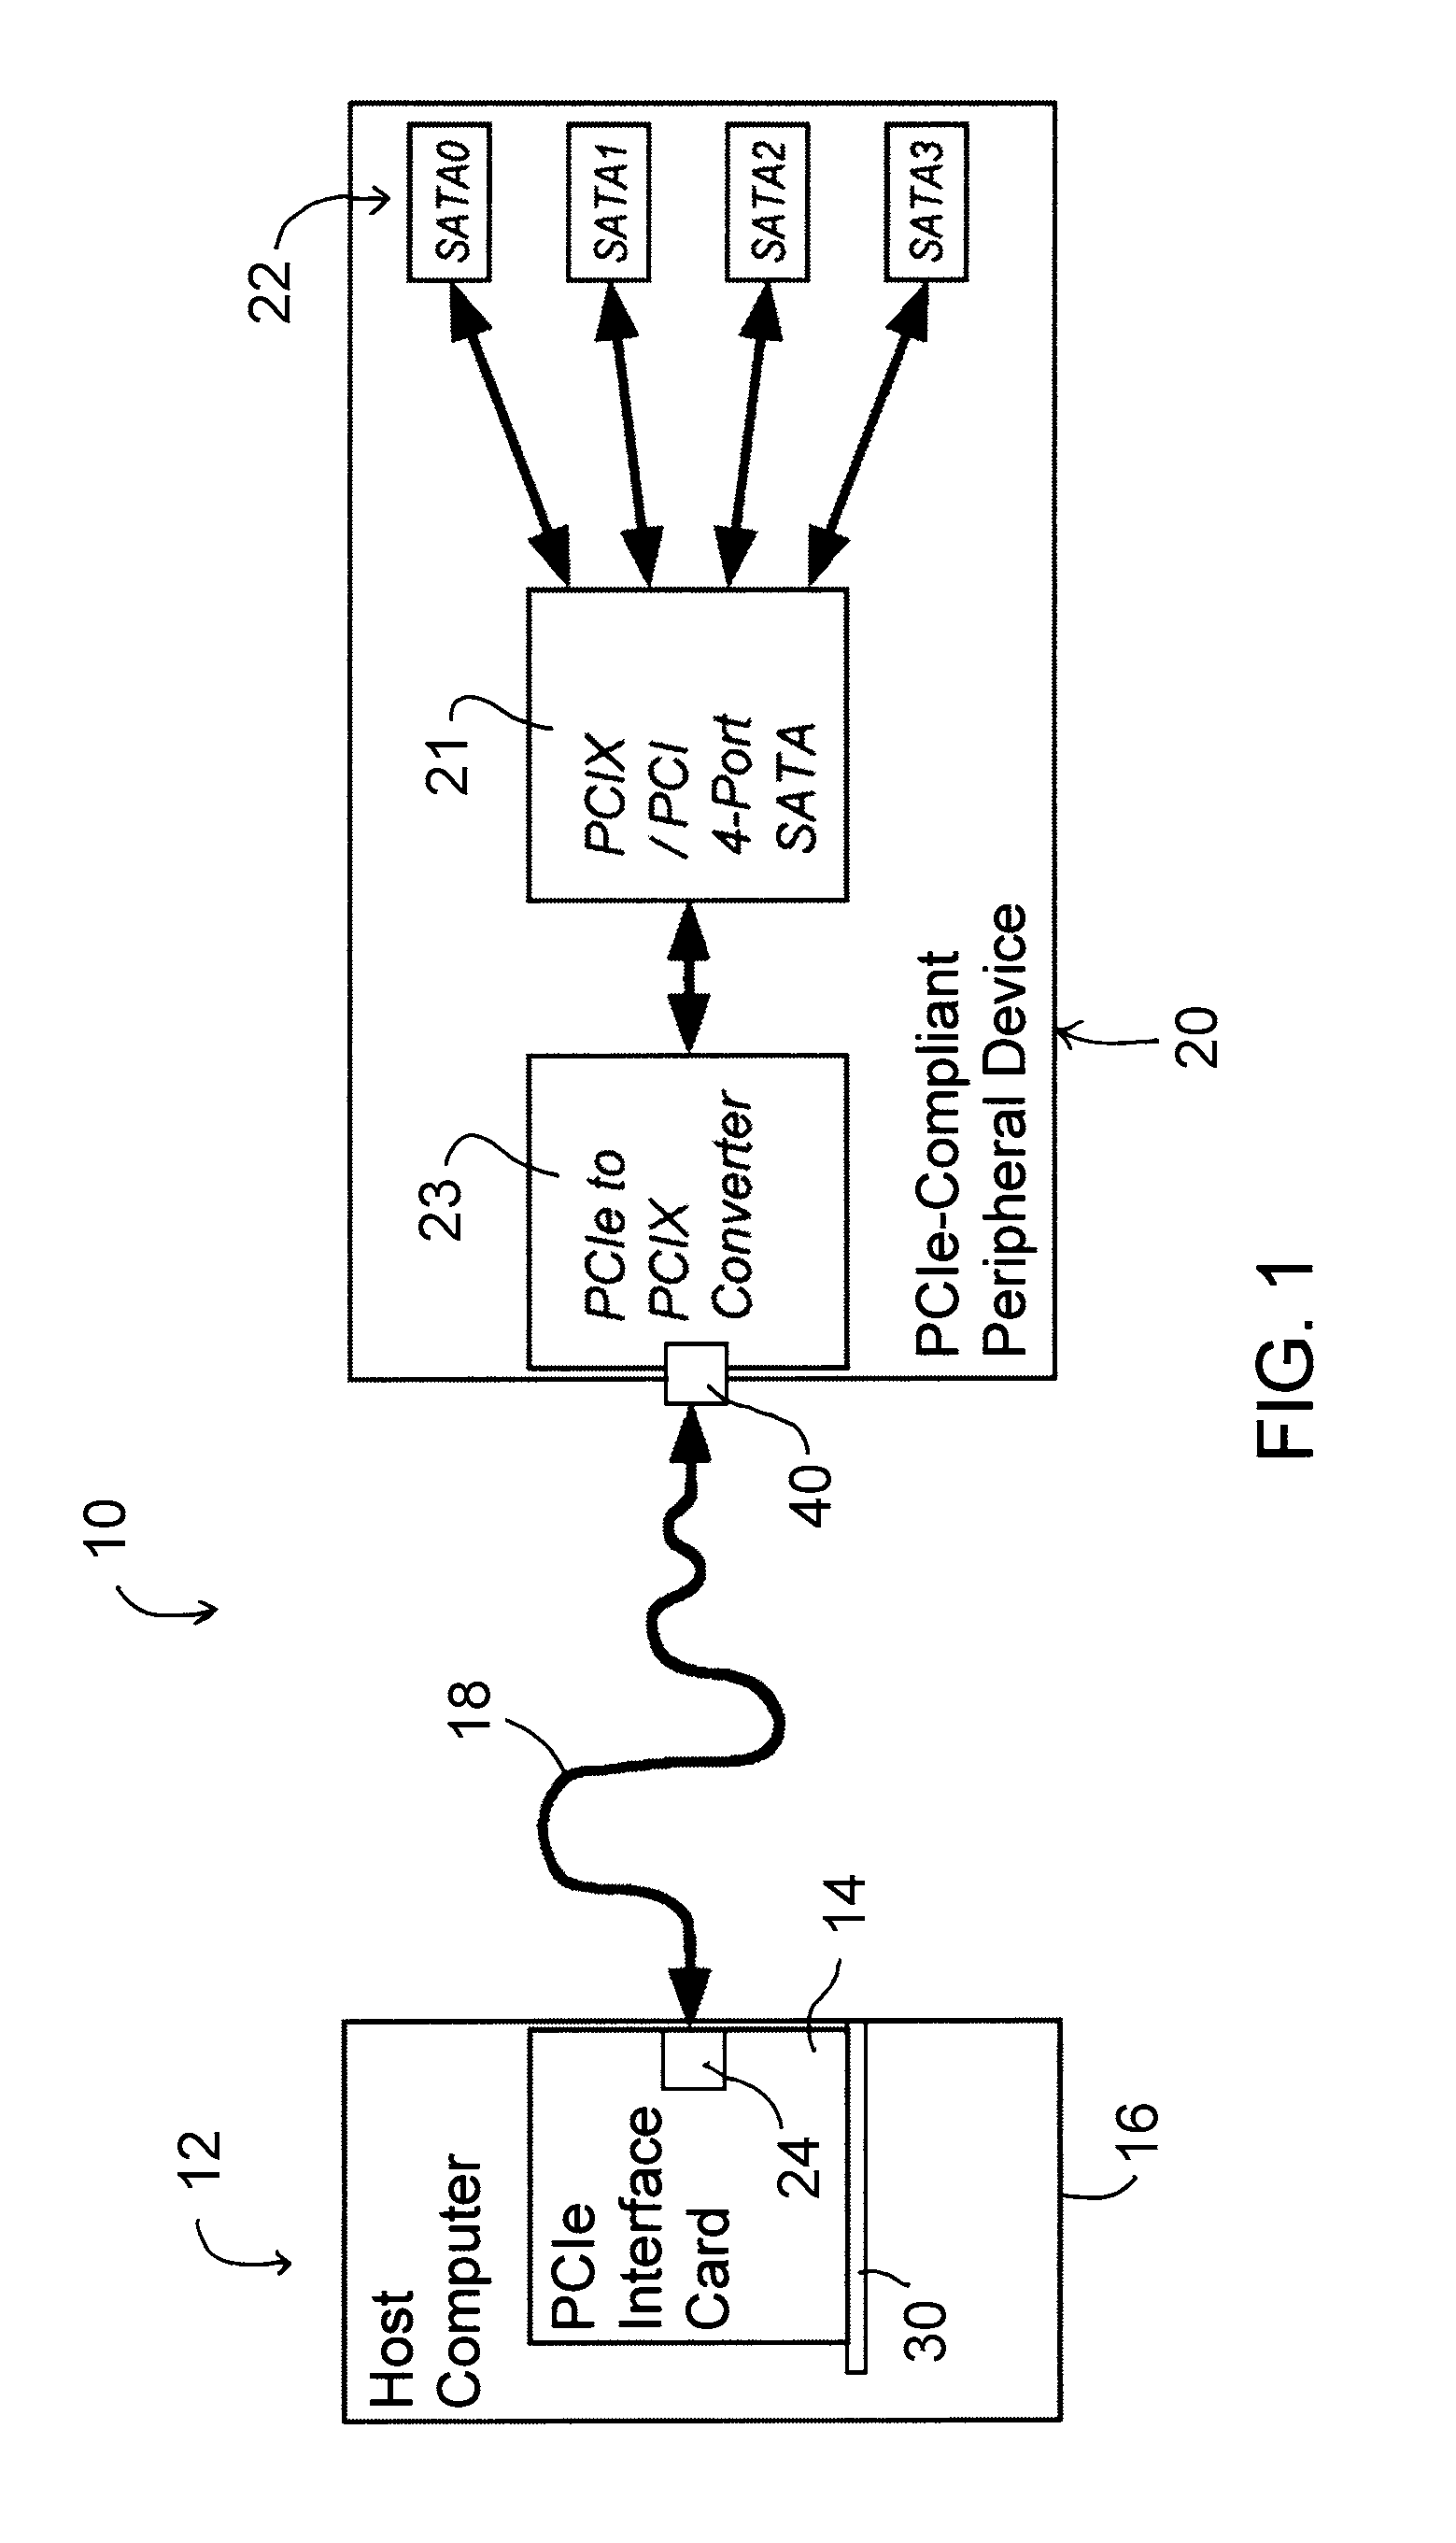 PCIe BUS EXTENSION SYSTEM, METHOD AND INTERFACES THEREFOR